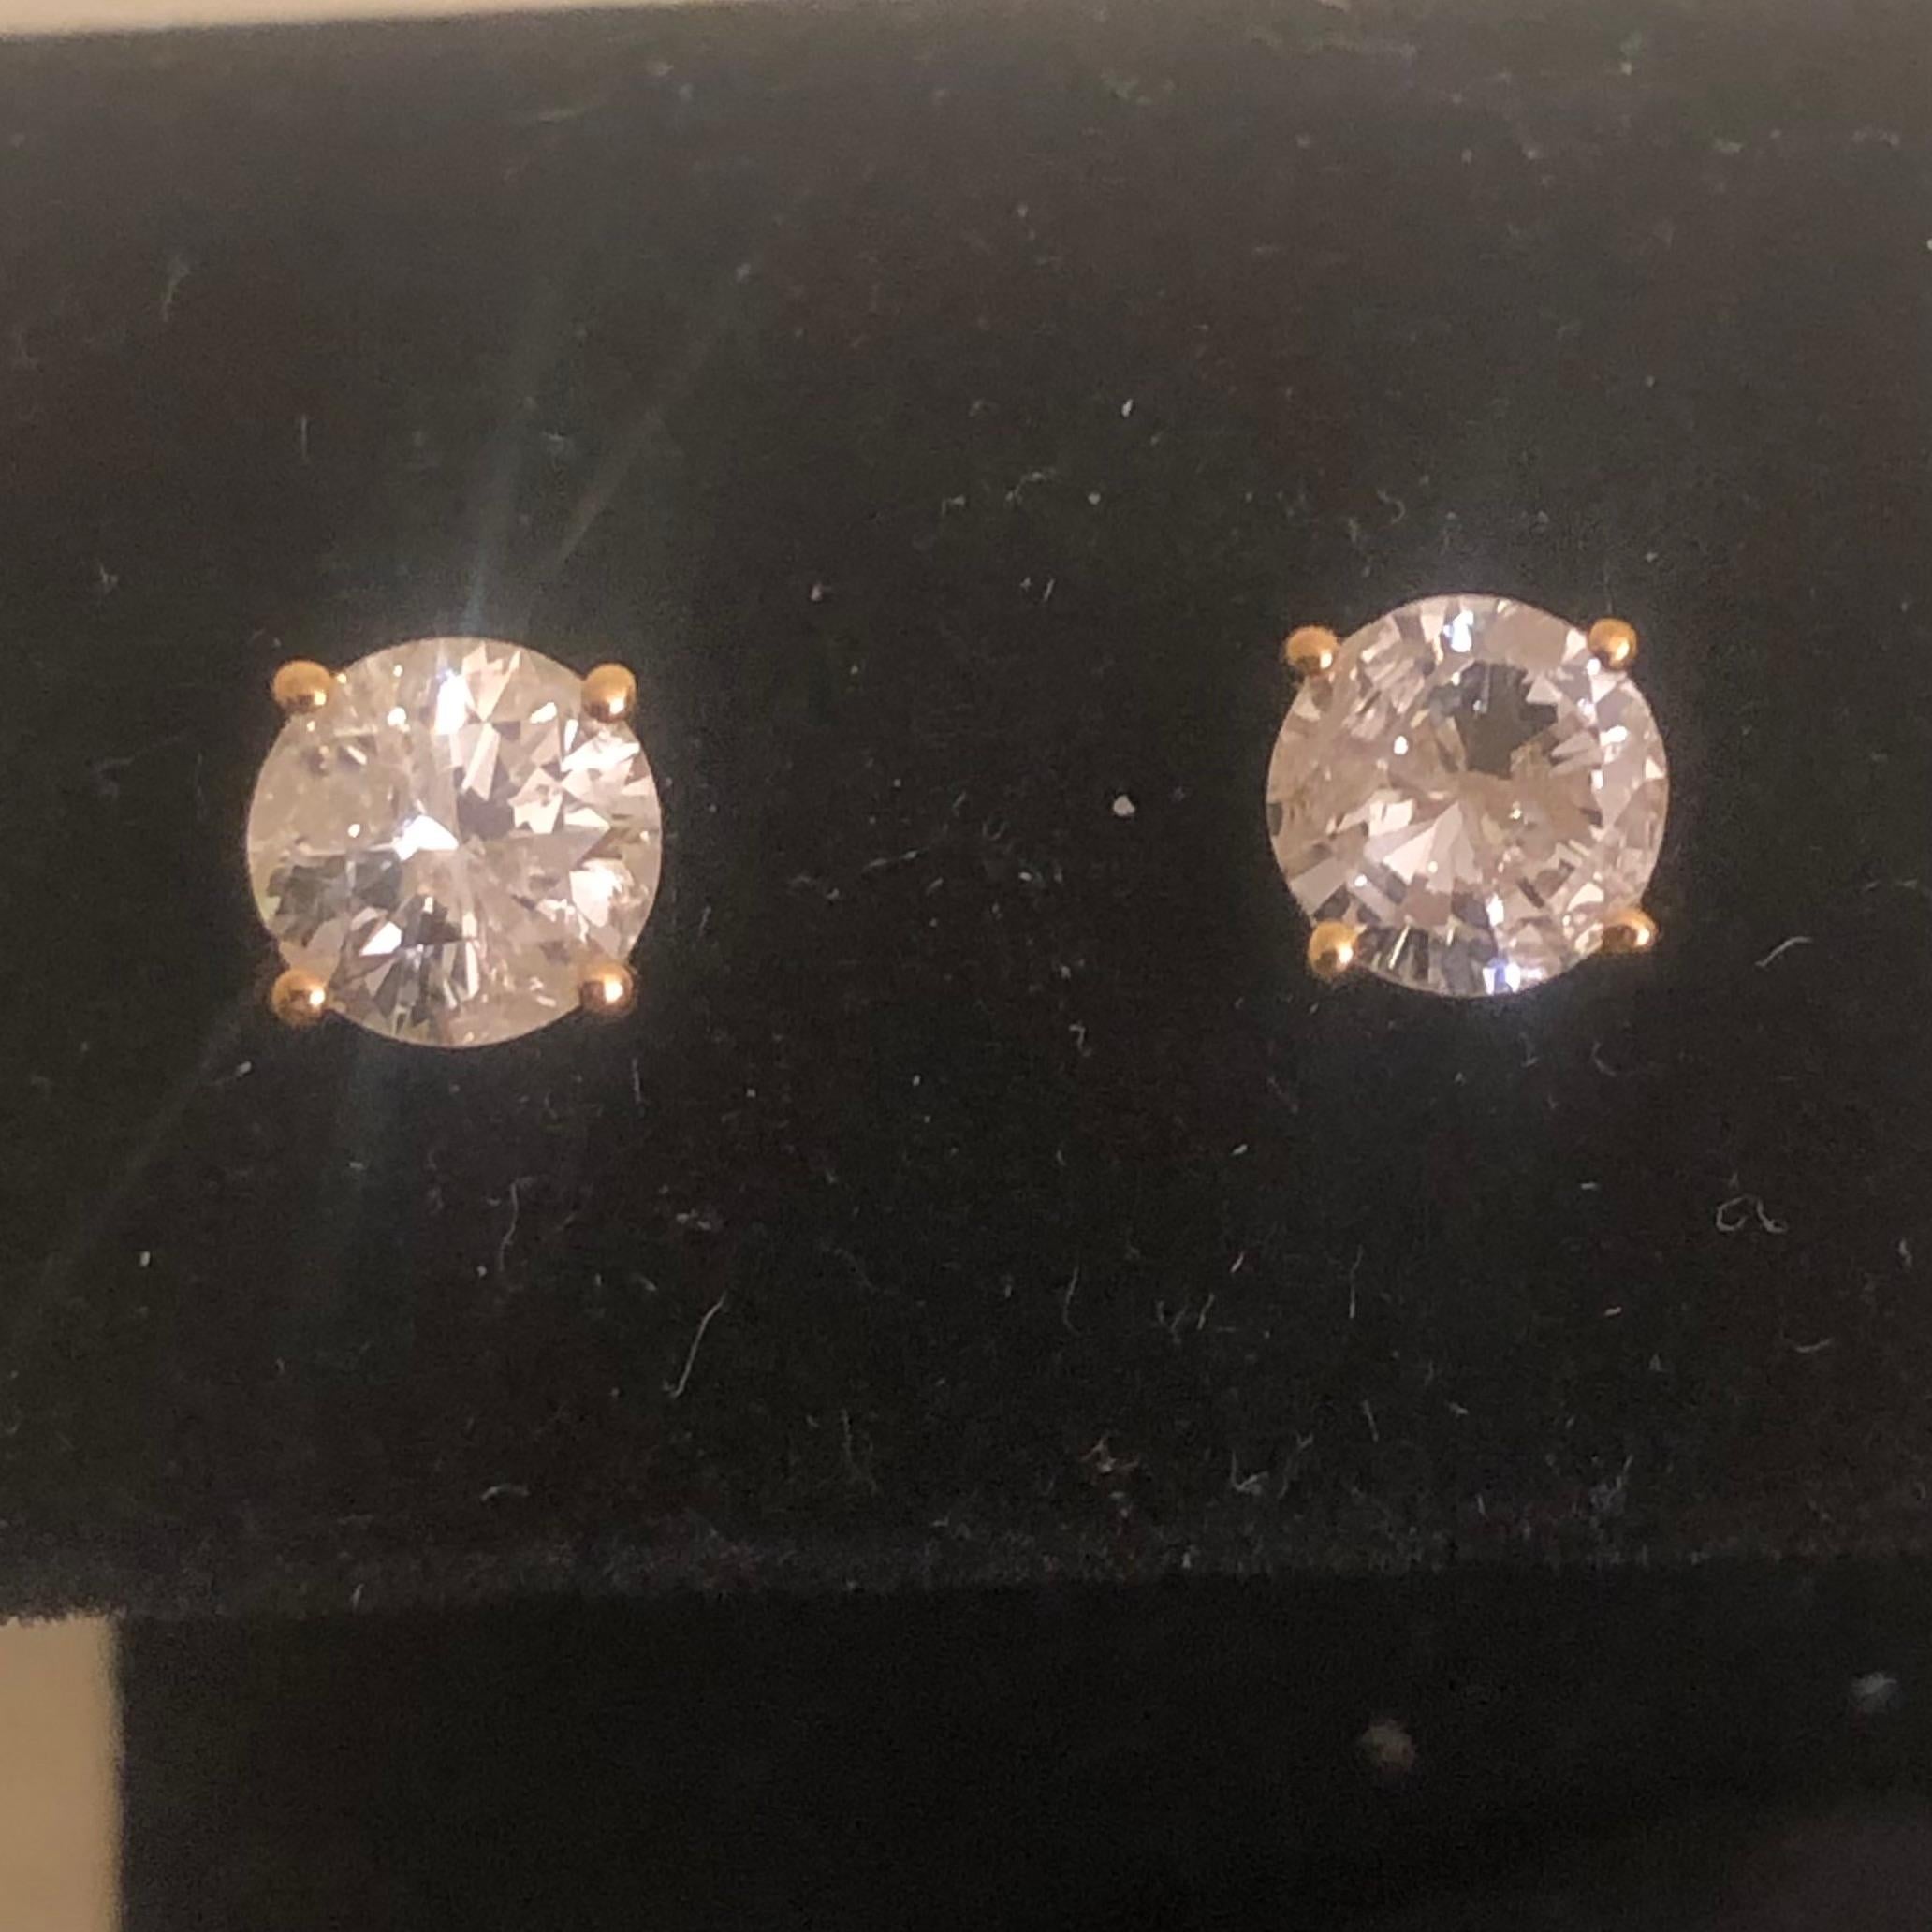 Stunning 2 Ct Round Solitaire Diamond Stud Earrings in 14K Yellow Gold. These natural diamond solitaire studs are certified with an appraisal report value of $7,470.00.

A large center solitaire diamond (size of an engagement ring) is set on each